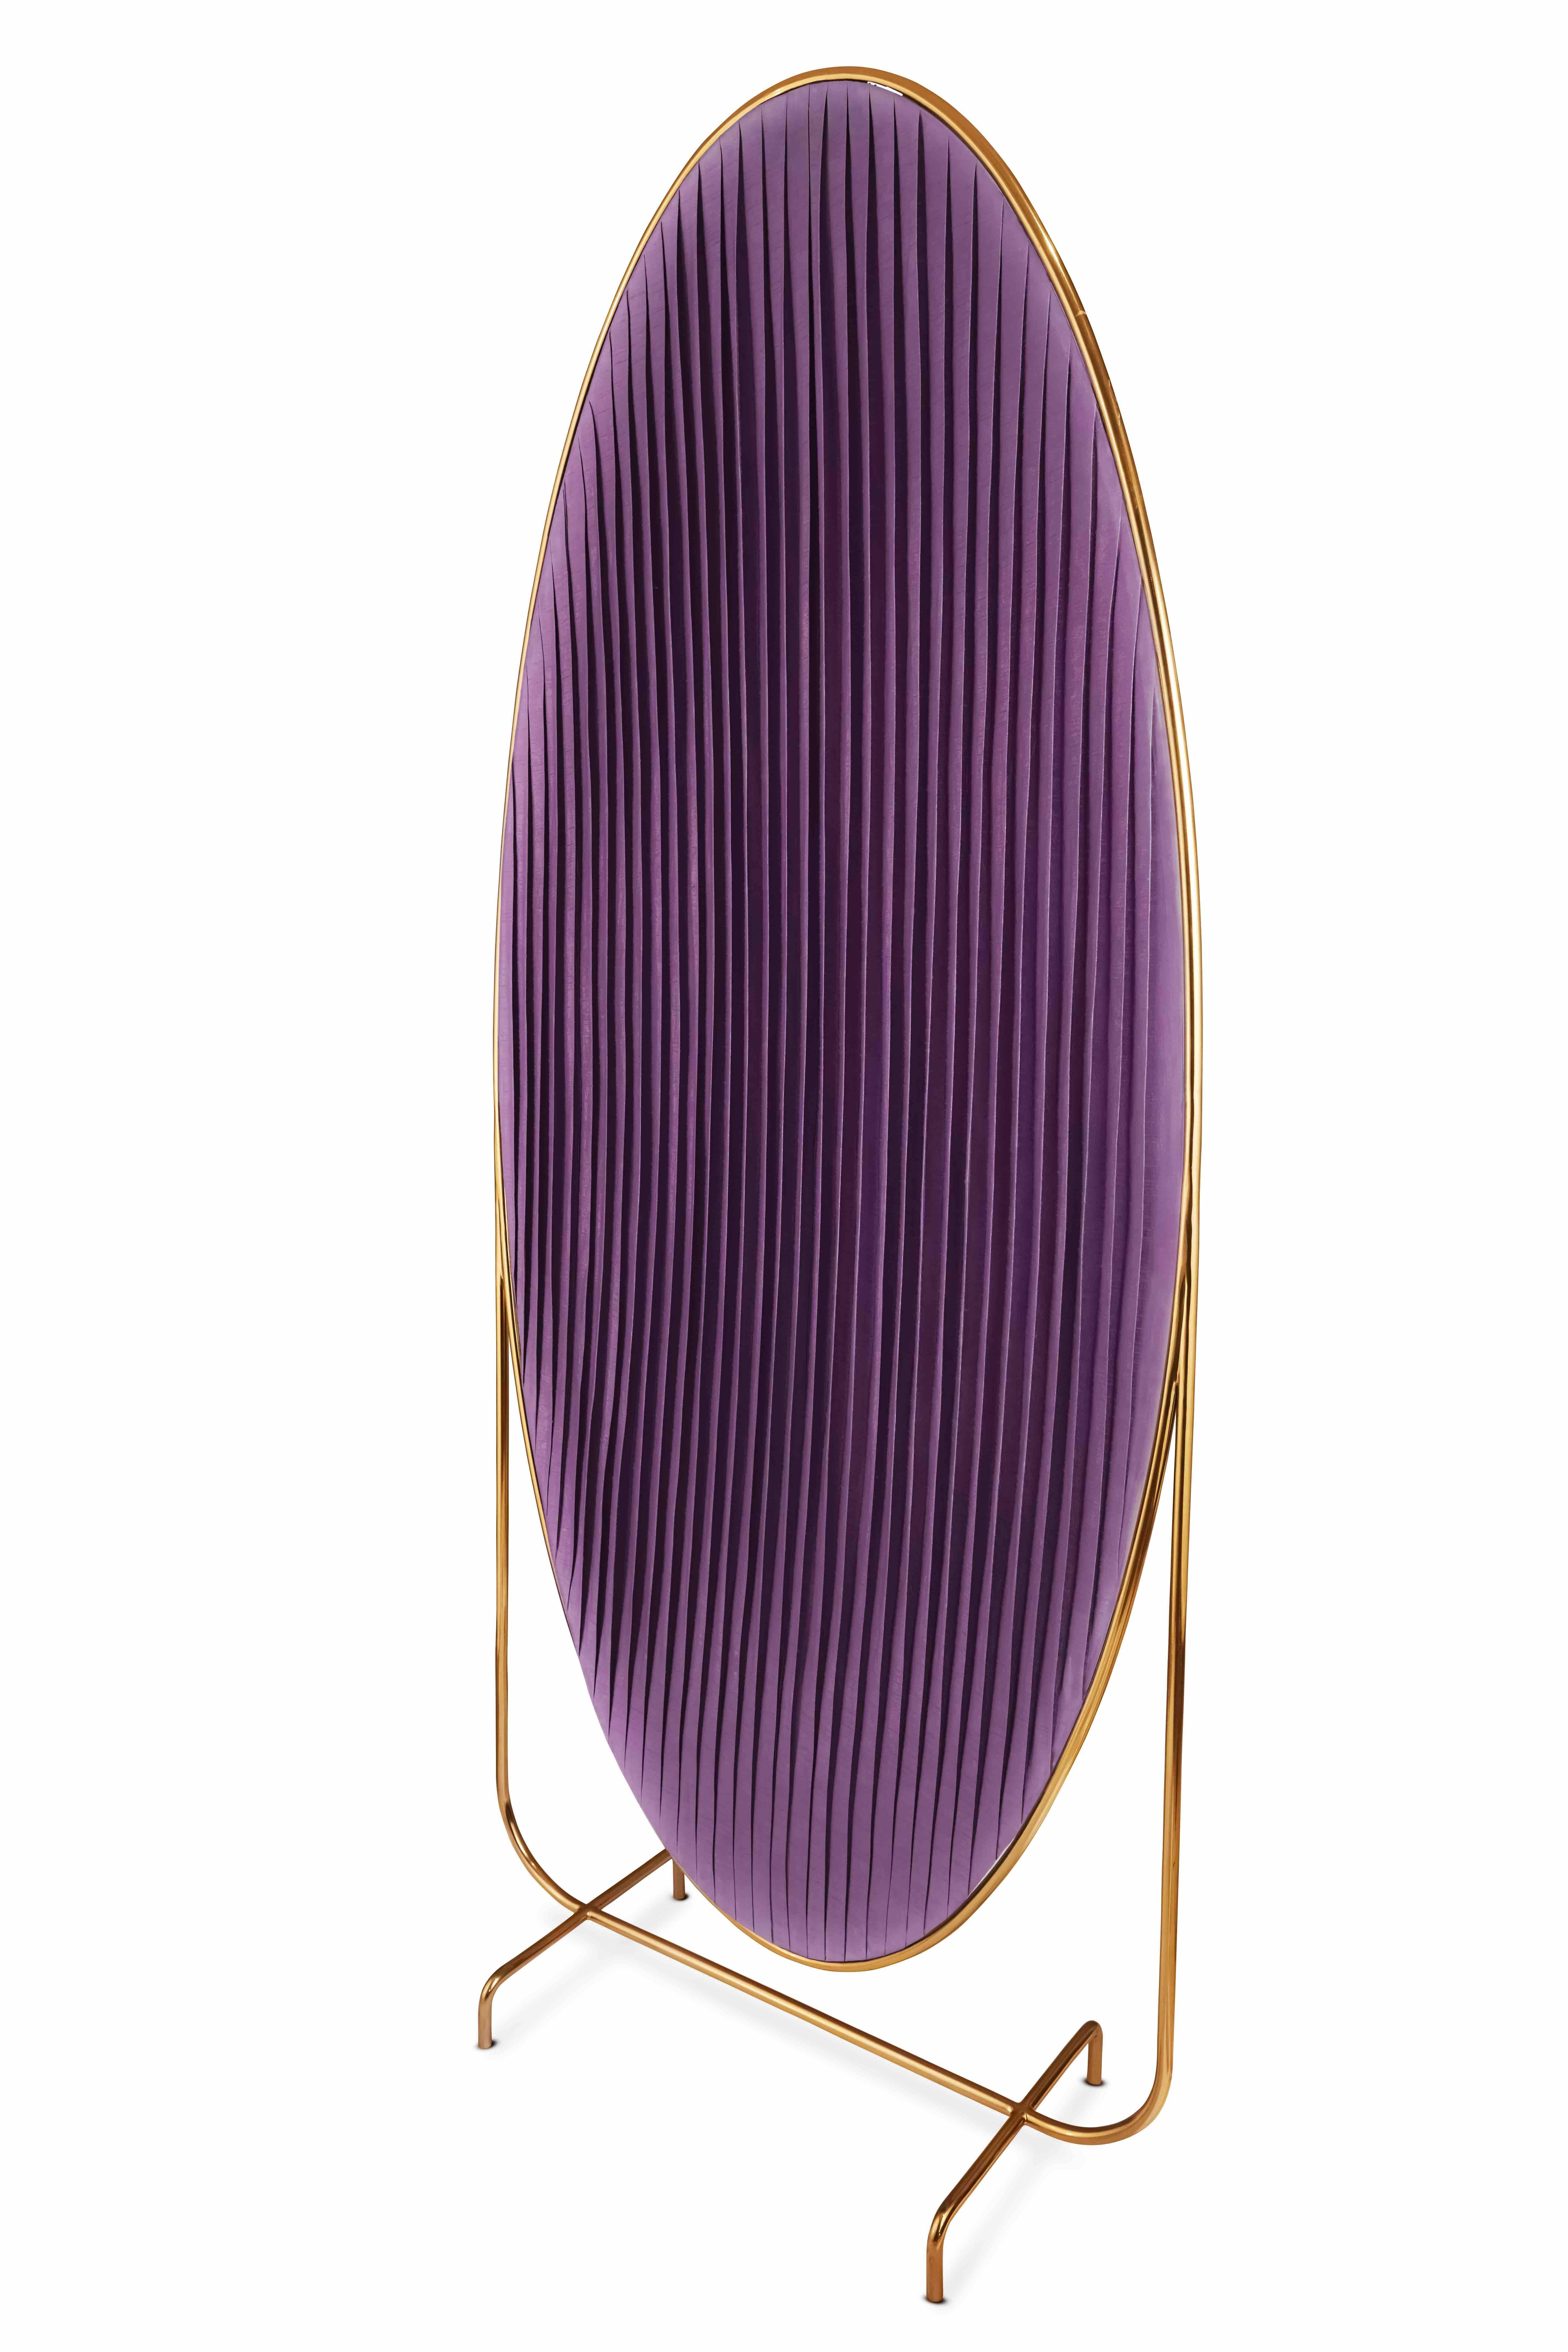 88 Secrets screen in gold metal and purple silk by Nika Zupanc is a tall and elegant room divider. It has a metal frame with meticulously pleated purple silk fabric.

Nika Zupanc, a strikingly renowned Slovenian designer, never shies away from